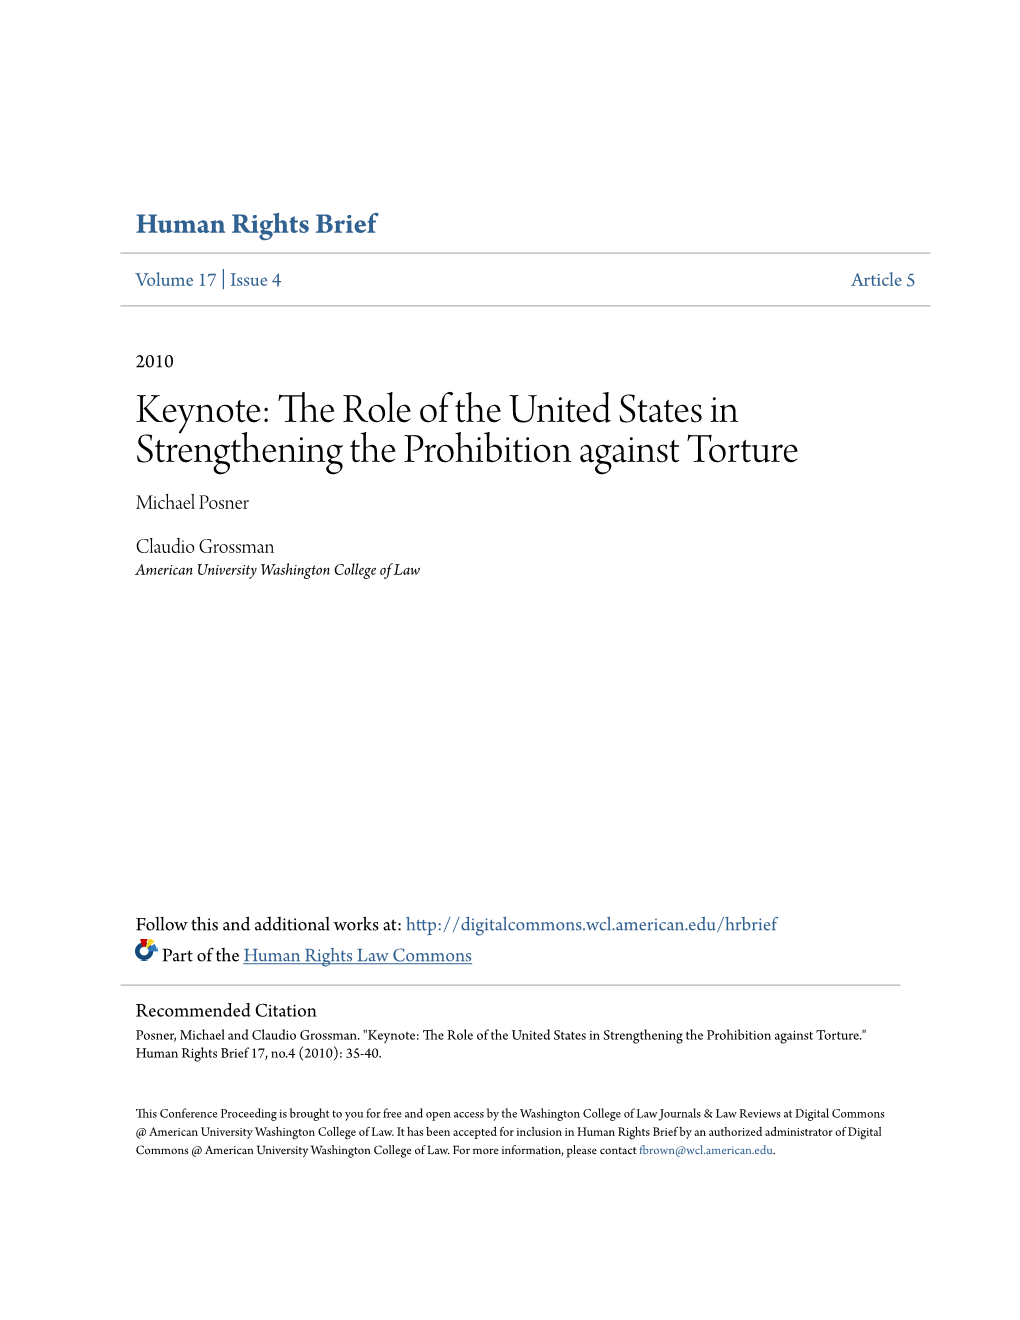 The Role of the United States in Strengthening the Prohibition Against Torture Michael Posner